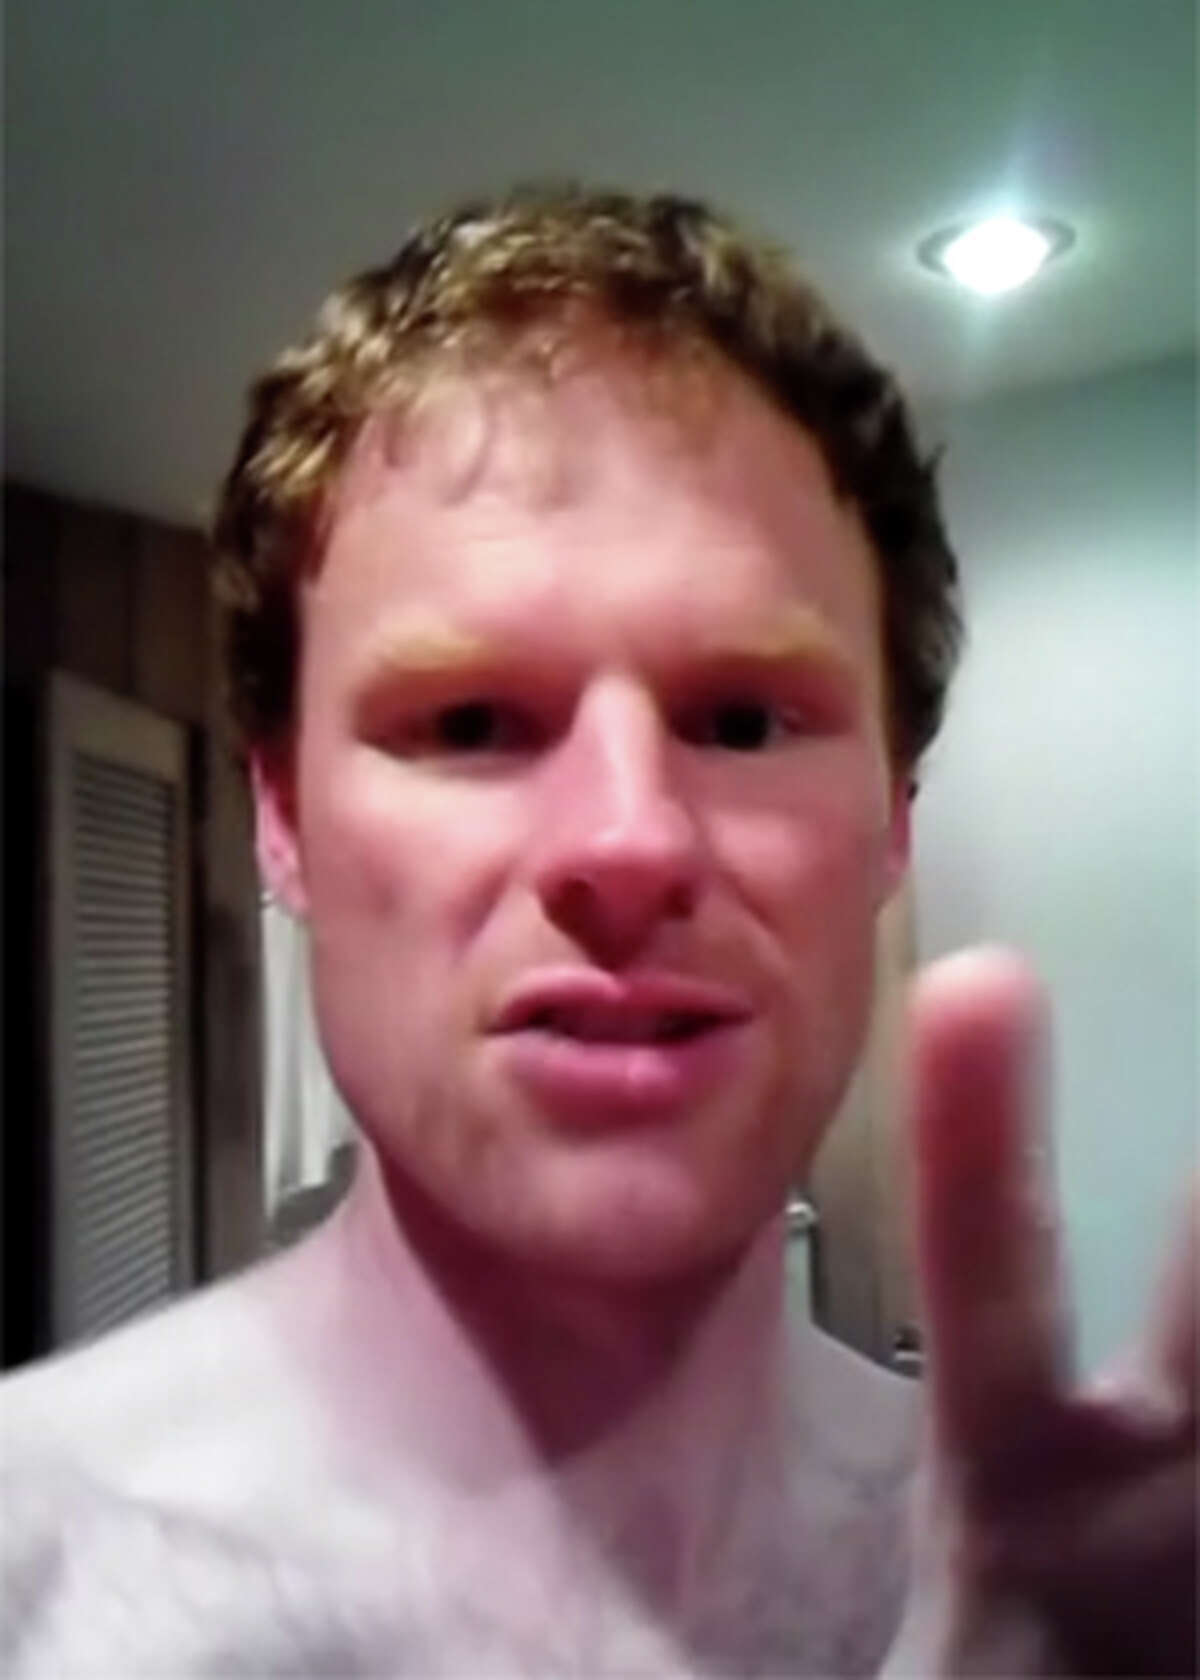 This image, taken from a video posted to Youtube, shows Mitchell Taylor, a Magnolia man charged with threatening to kill Seattle Mayor Ed Murray and councilwoman Kshama Sawant. Taylor, 32, is identified by police as the man shown in the video and others.